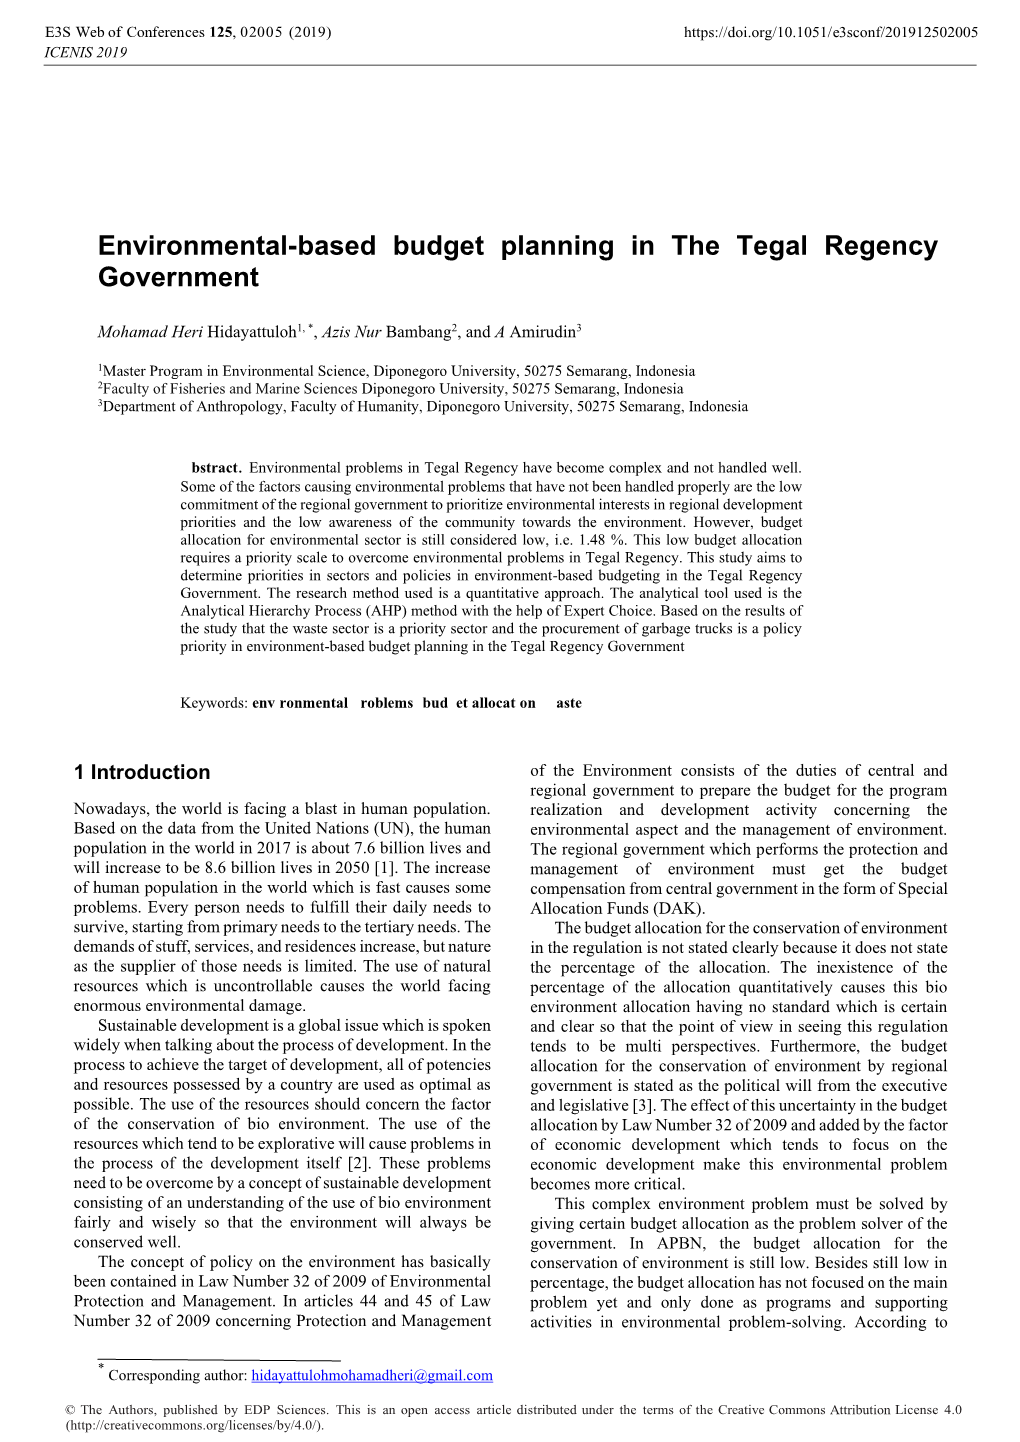 Environmental-Based Budget Planning in the Tegal Regency Government